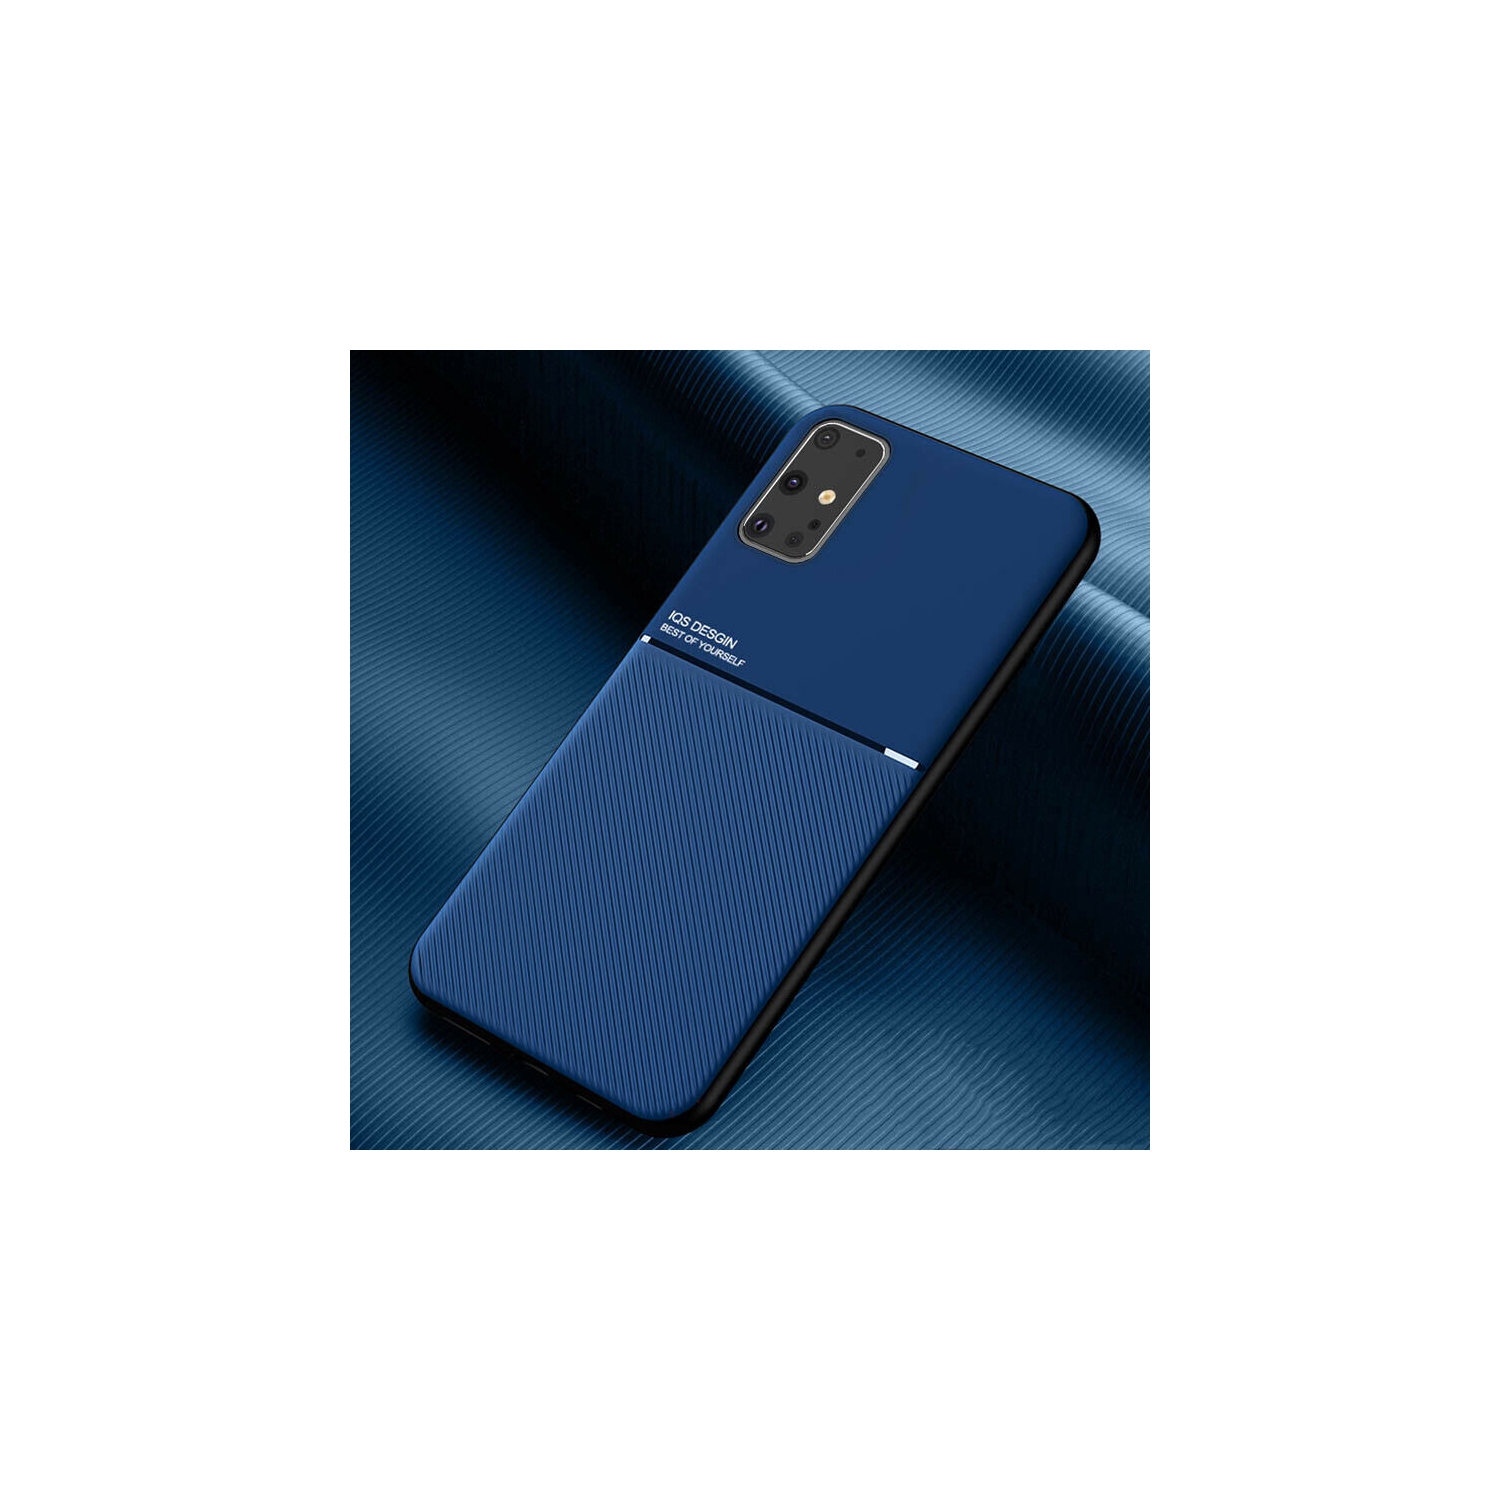 Kelvin Leather Magnetic Texture Slim Matte Back Phone Cove Anti Fall Frosted Stripe Cases For Samsunf Galaxy S20 FE -Blue (FREE SHIPPING)